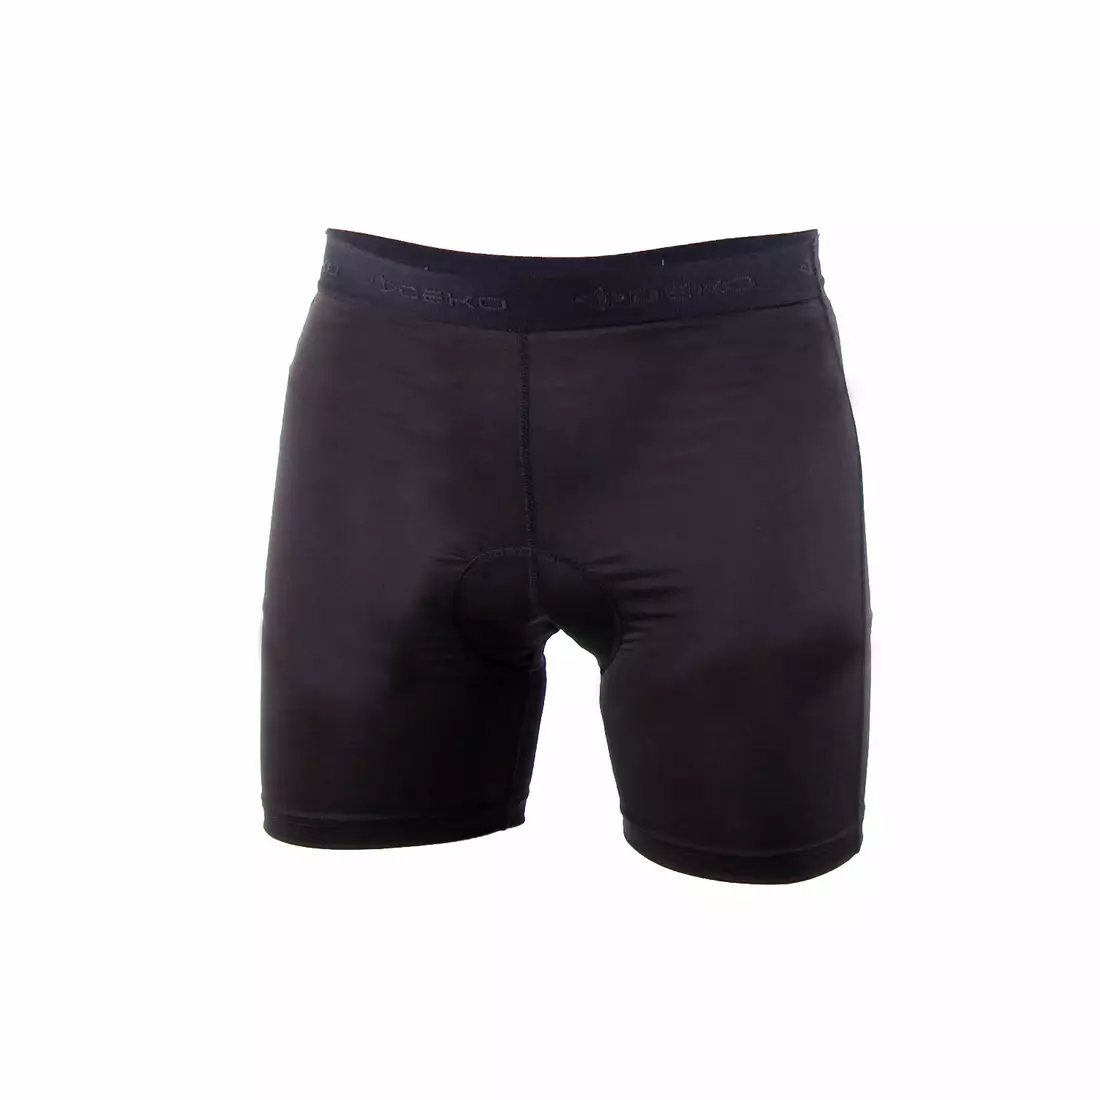 DEKO men's cycling boxer shorts with a bicycle insert, black